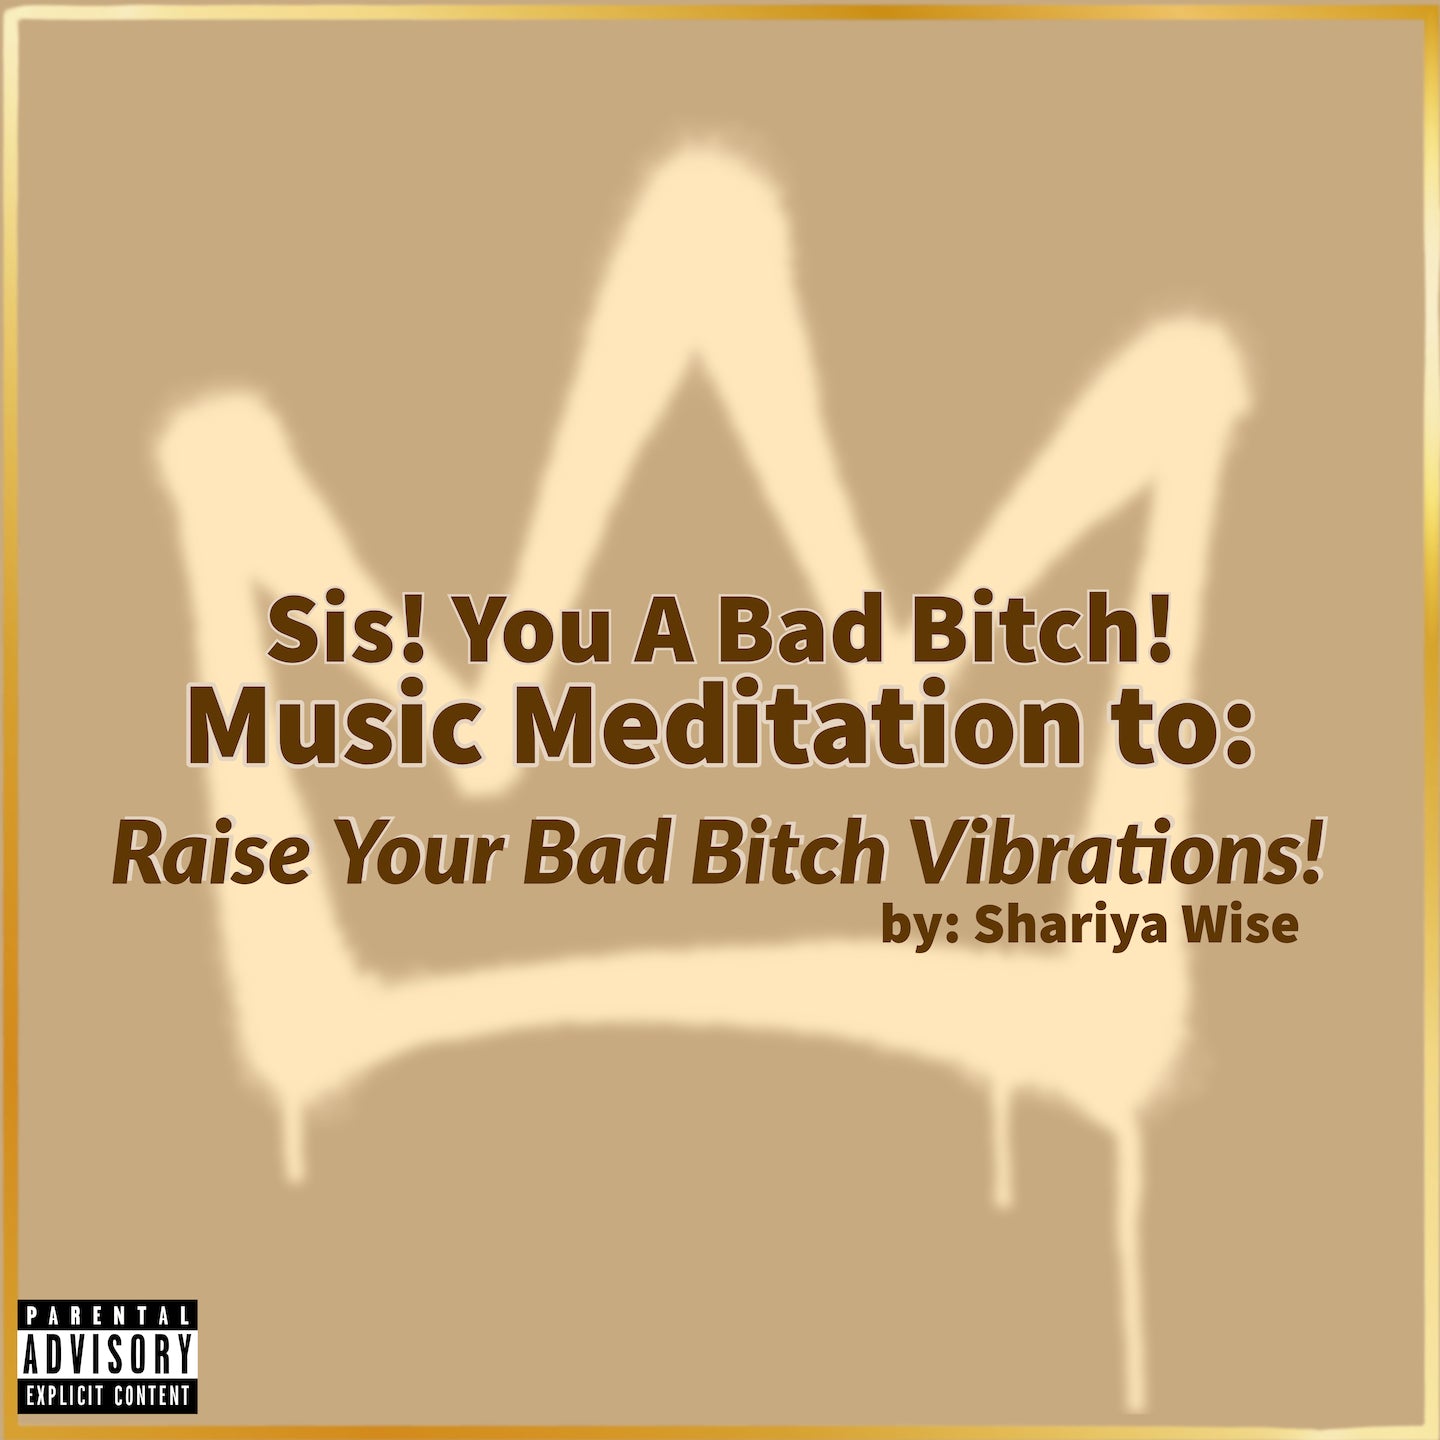 Sis! You A Bad Bitch! Music Meditation to Raise Your Bad Bitch Vibrations